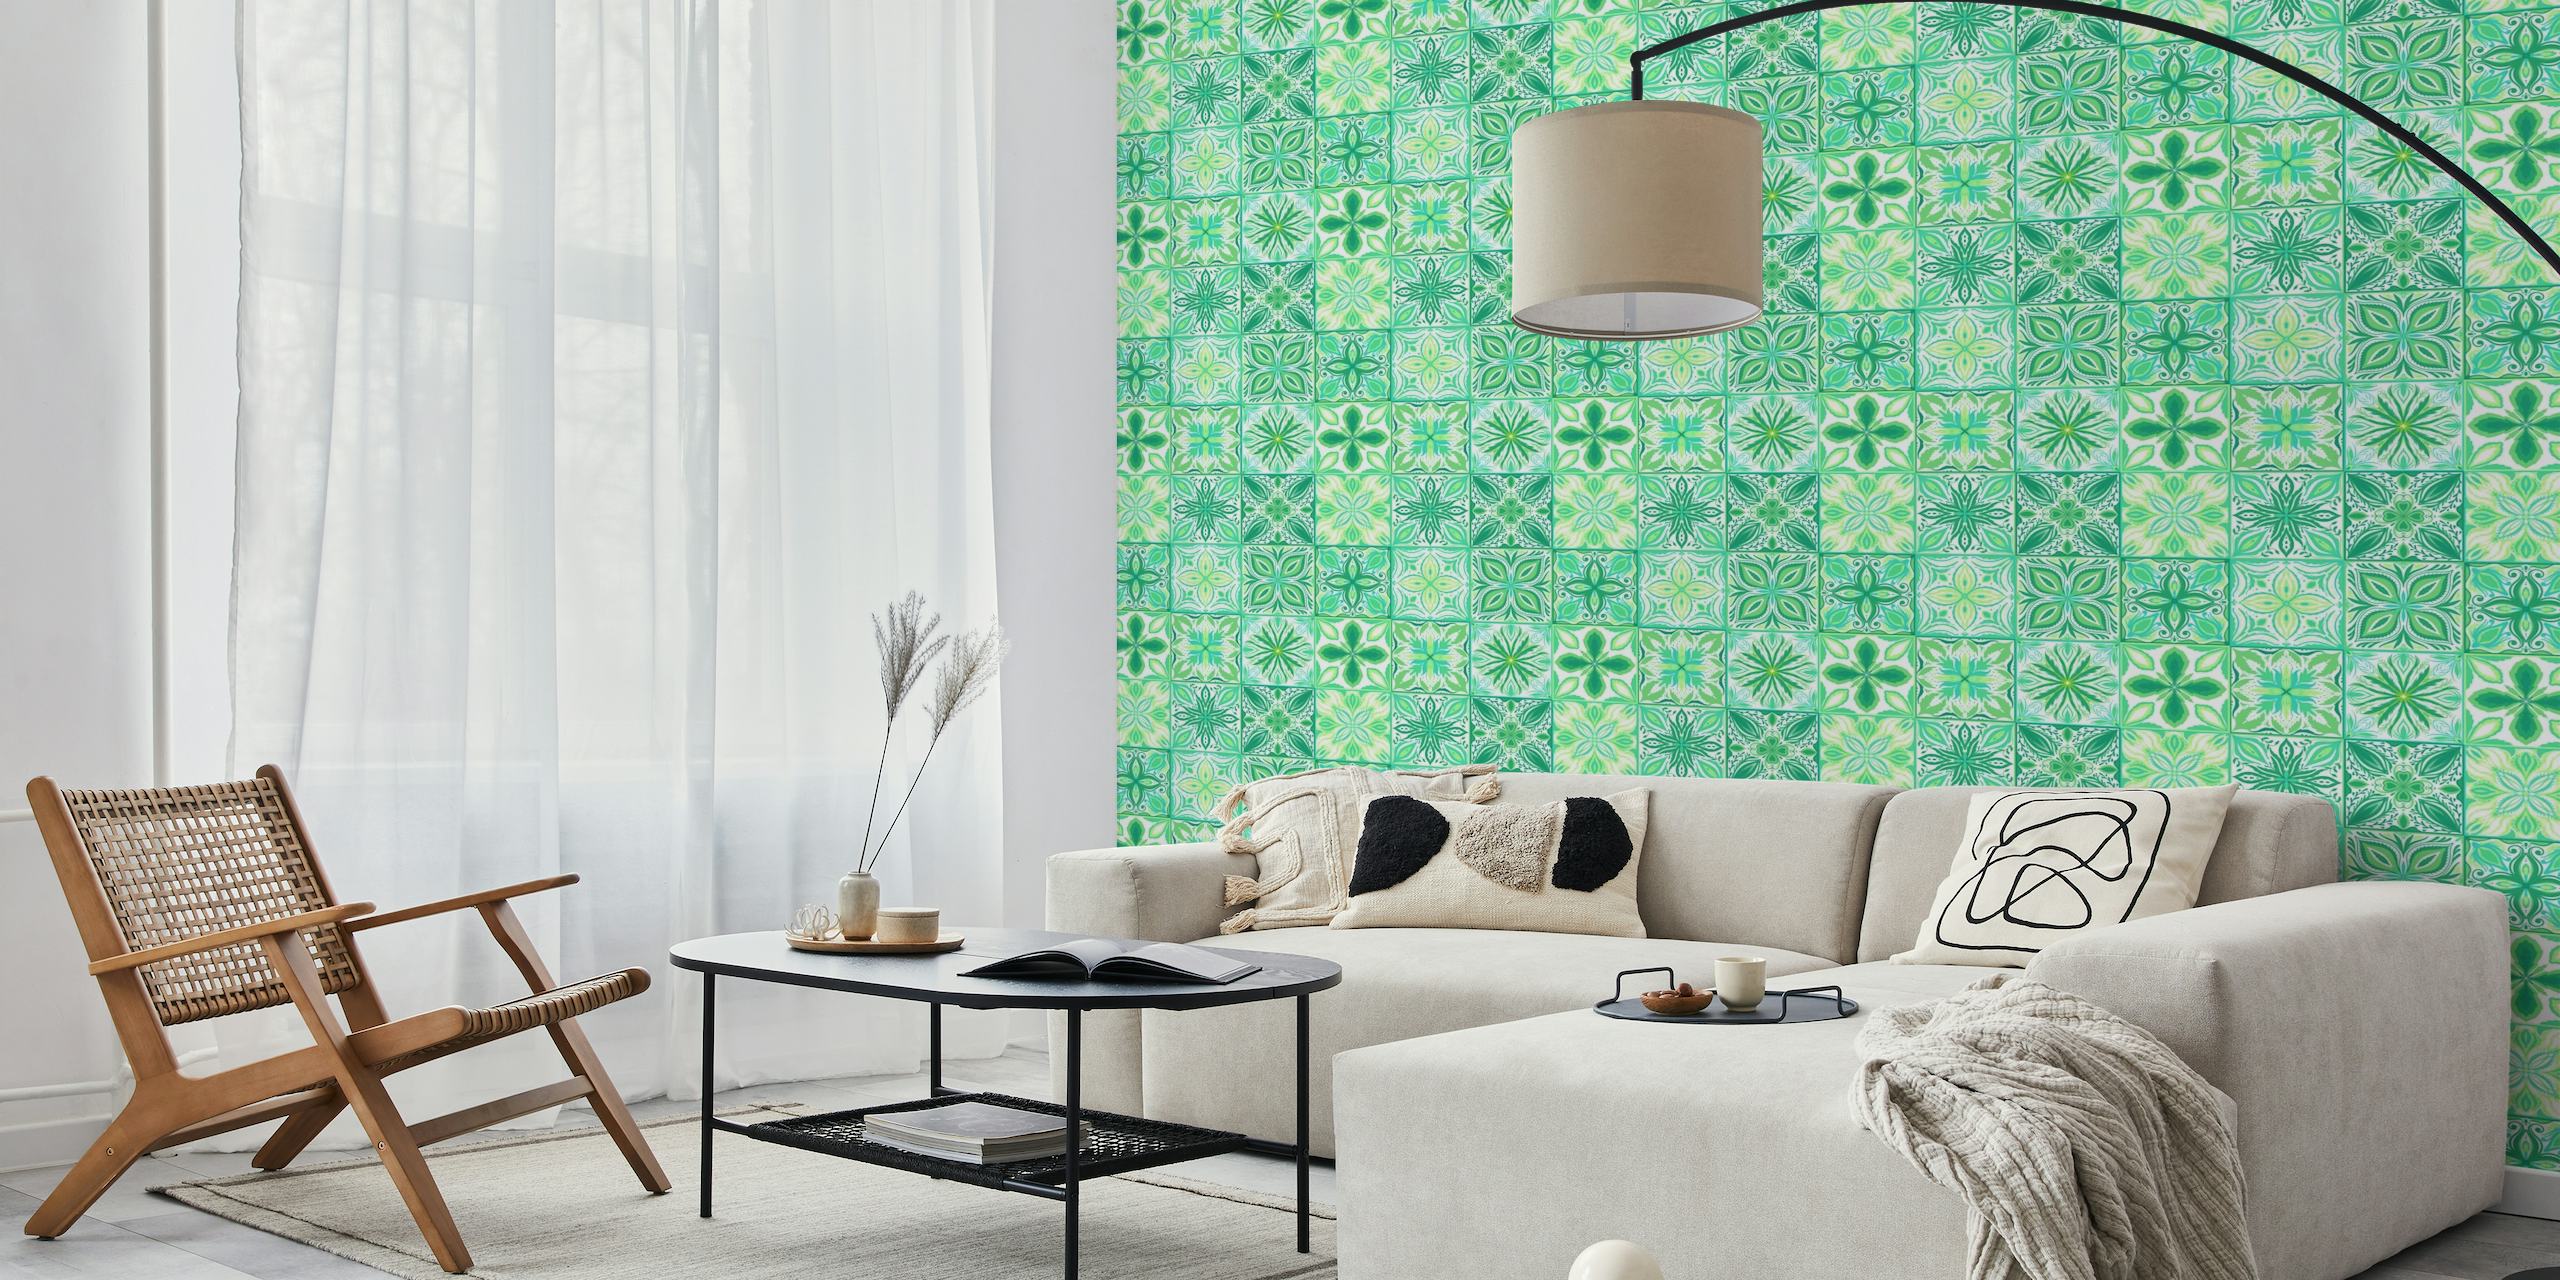 Ornate tiles in green and white behang